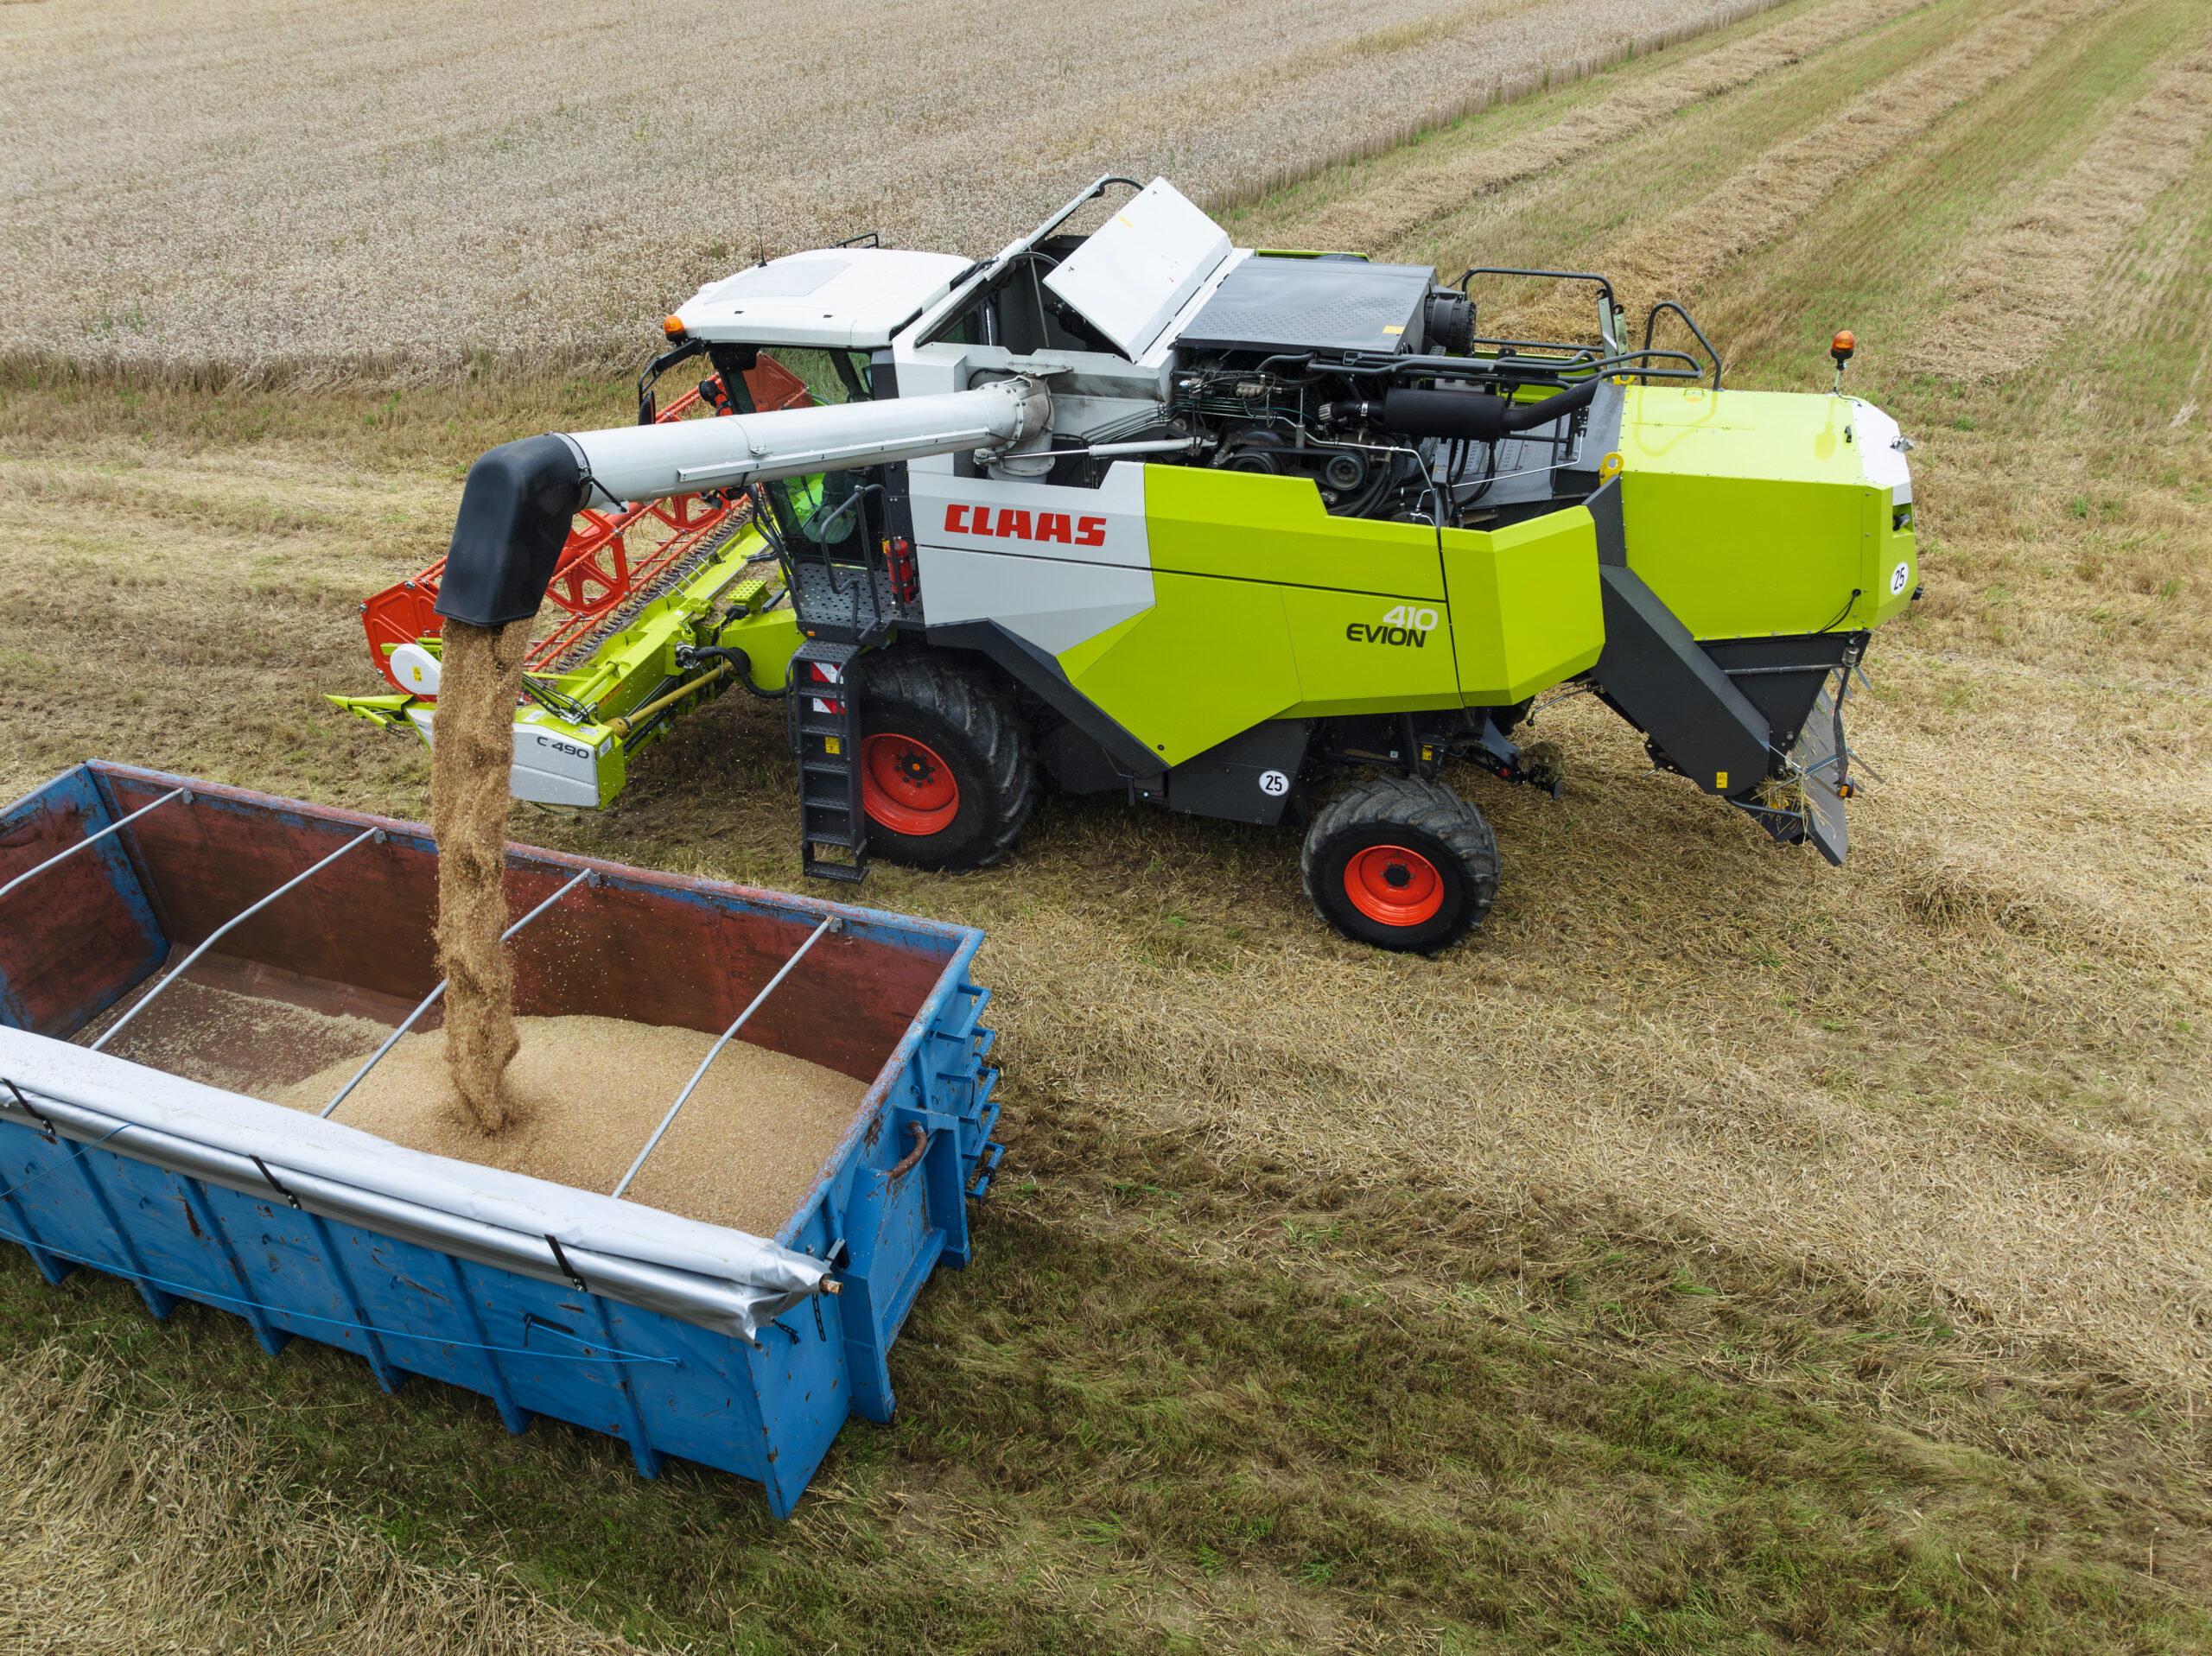 CLAAS completes combine harvester family with new EVION model series